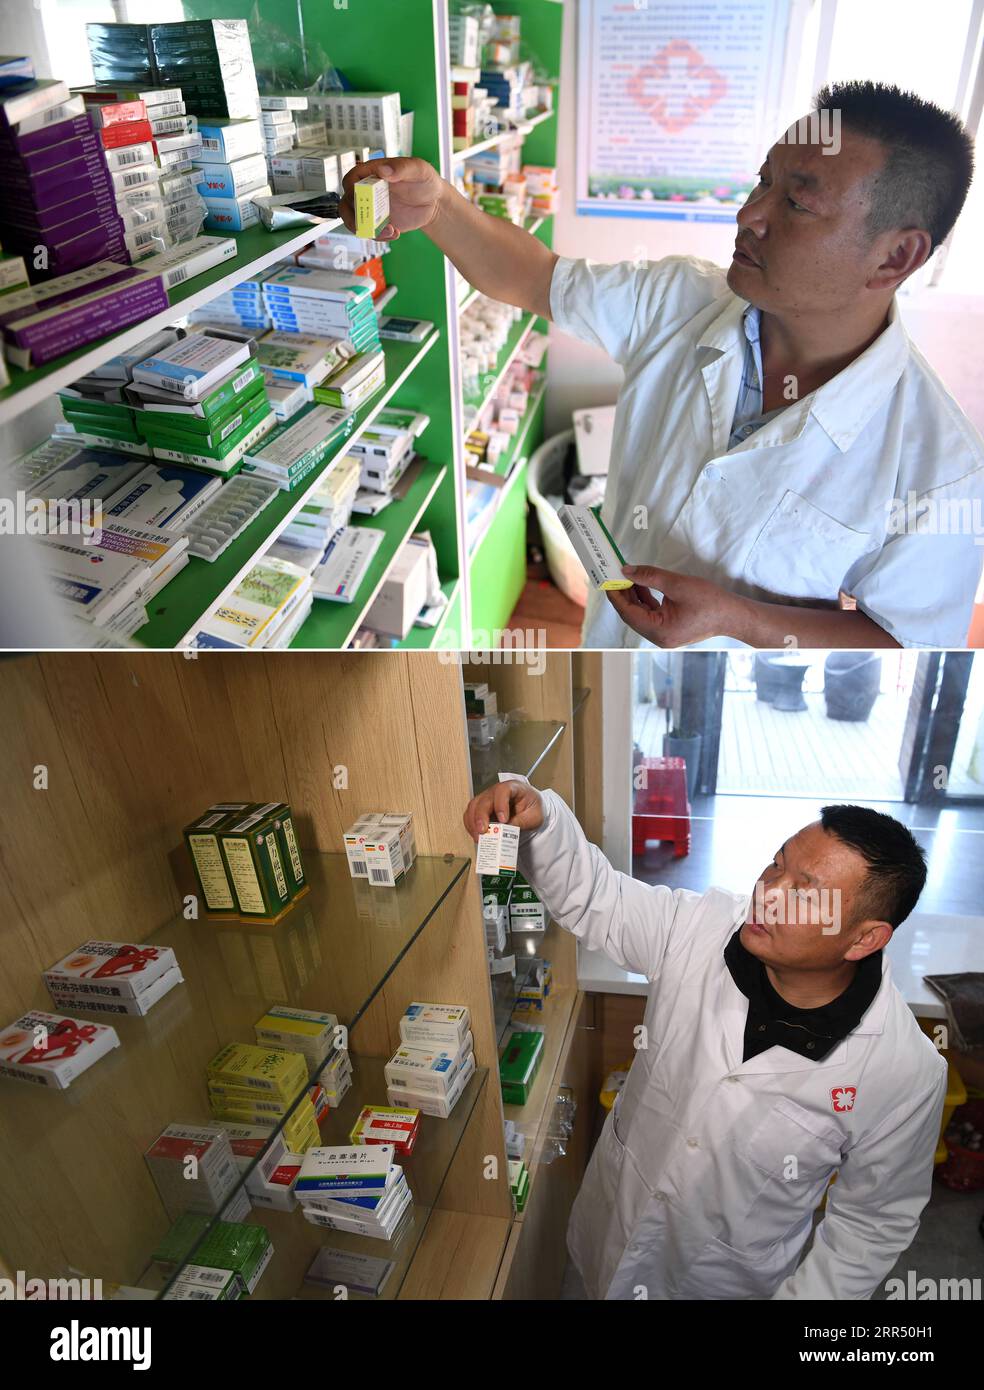 201218 -- JINZHAI, Dec. 18, 2020 -- Combo photo shows Yu Jiajun preparing medicines for his patient on Sept. 14, 2017 upper and arranging the medicines on Dec. 16, 2020 lower at the health station in Jinzhai County of Luan City, east China s Anhui Province. Deep in the Xianghongdian Reservoir area in Jinzhai County of Luan City, east China s Anhui Province, there is an isolated island, which used to be home to over 40 poor families. Yu Jiajun, 42, is the only doctor in the village. In the past, there was no health station on the island. Villagers had to row a boat for two or three hours to go Stock Photo